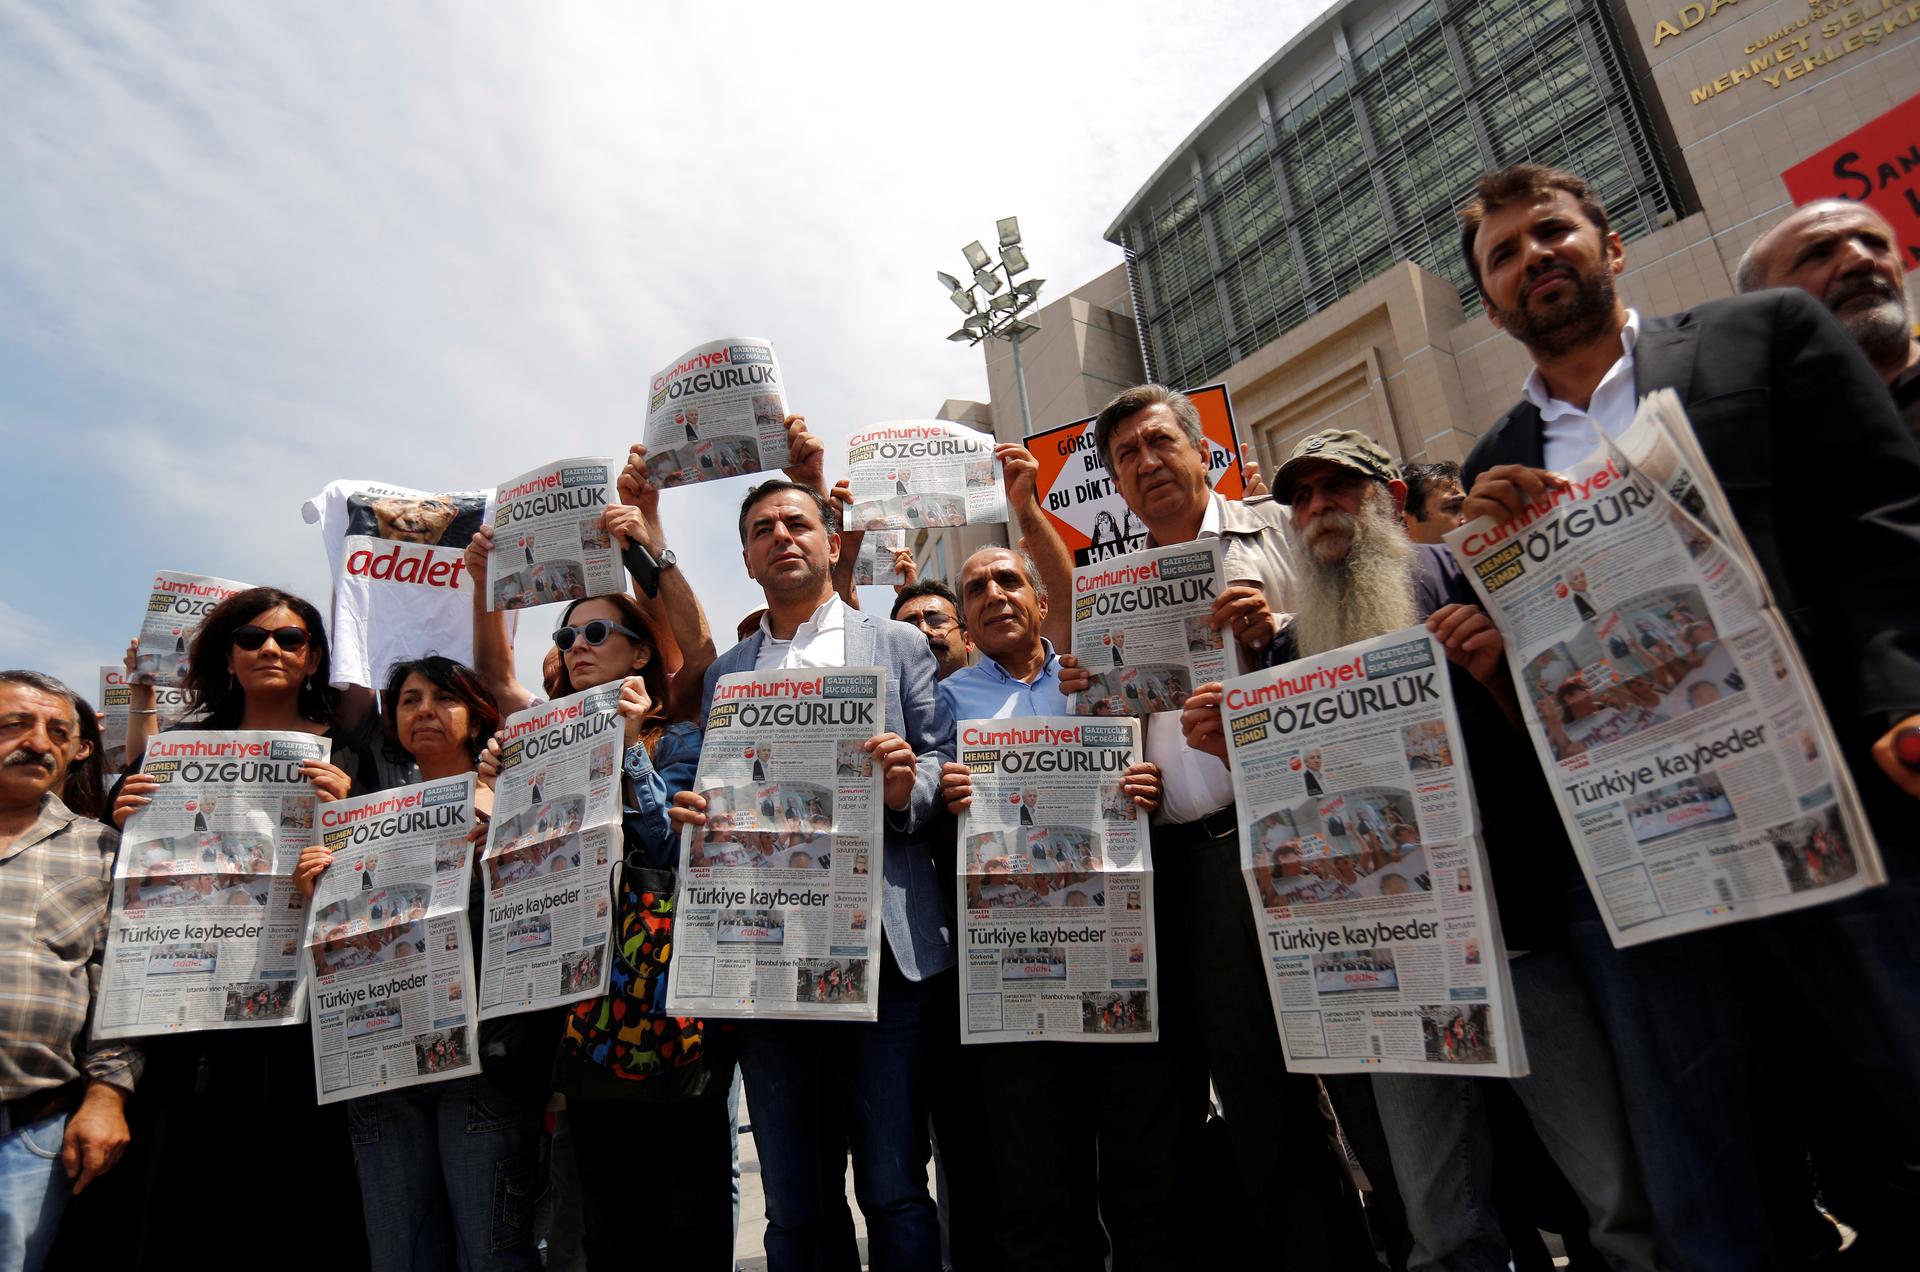 Press freedom activists hold copies of the opposition newspaper Cumhuriyet during a demonstration in solidarity with the jailed members of the newspaper outside a courthouse, in Istanbul, Turkey, July 28, 2017.